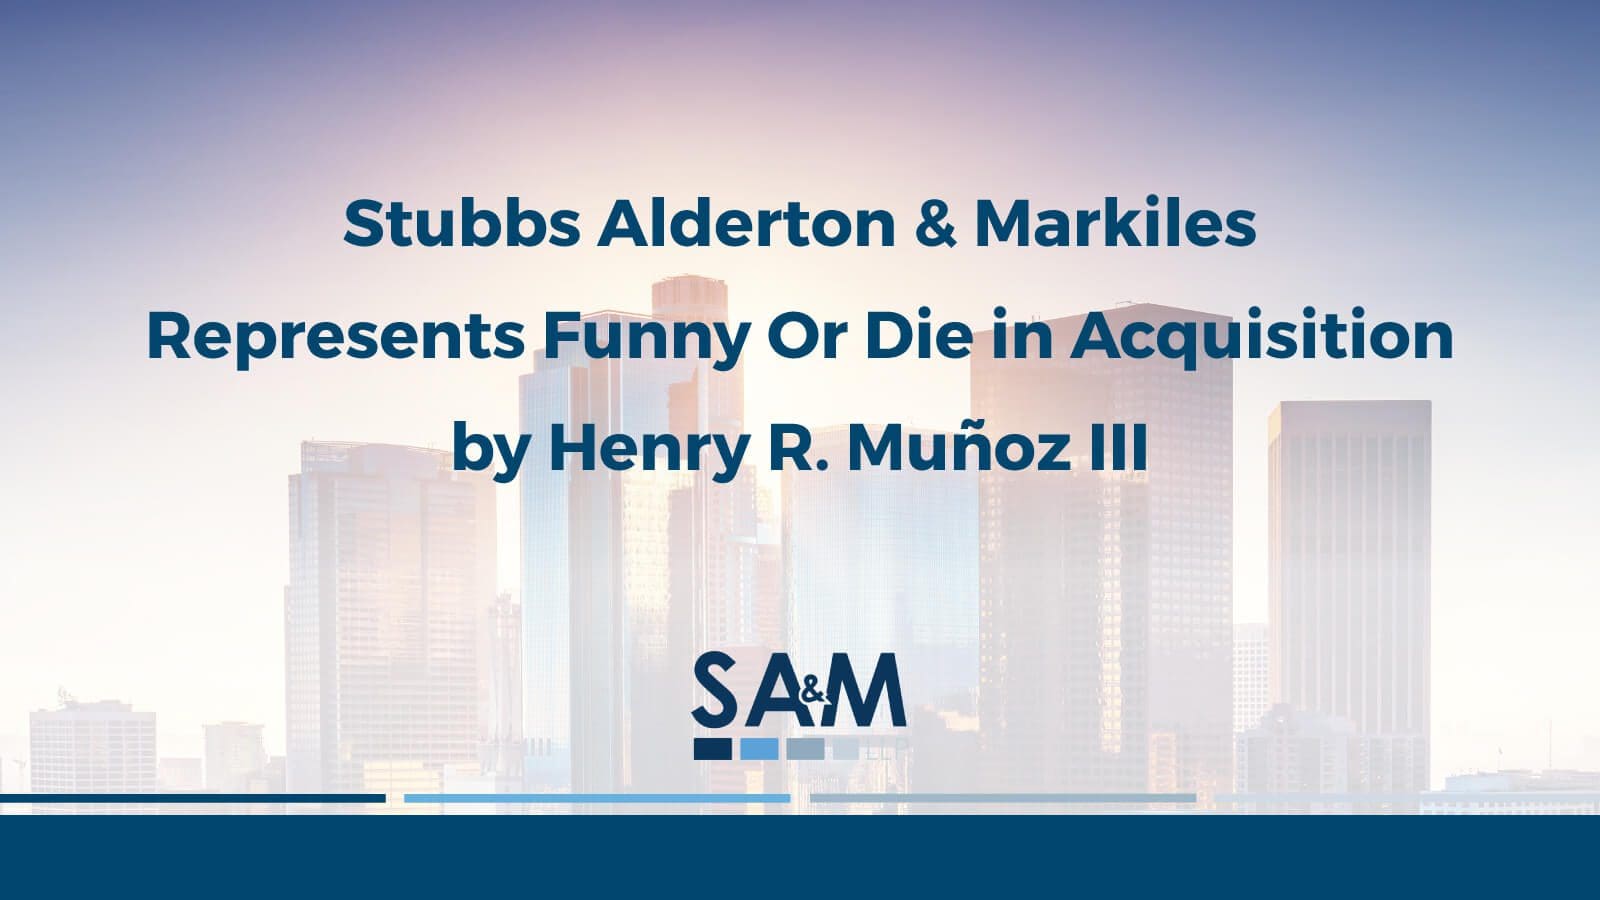 Stubbs Alderton & Markiles Represents Funny Or Die in Acquisition by Henry R. Muñoz III